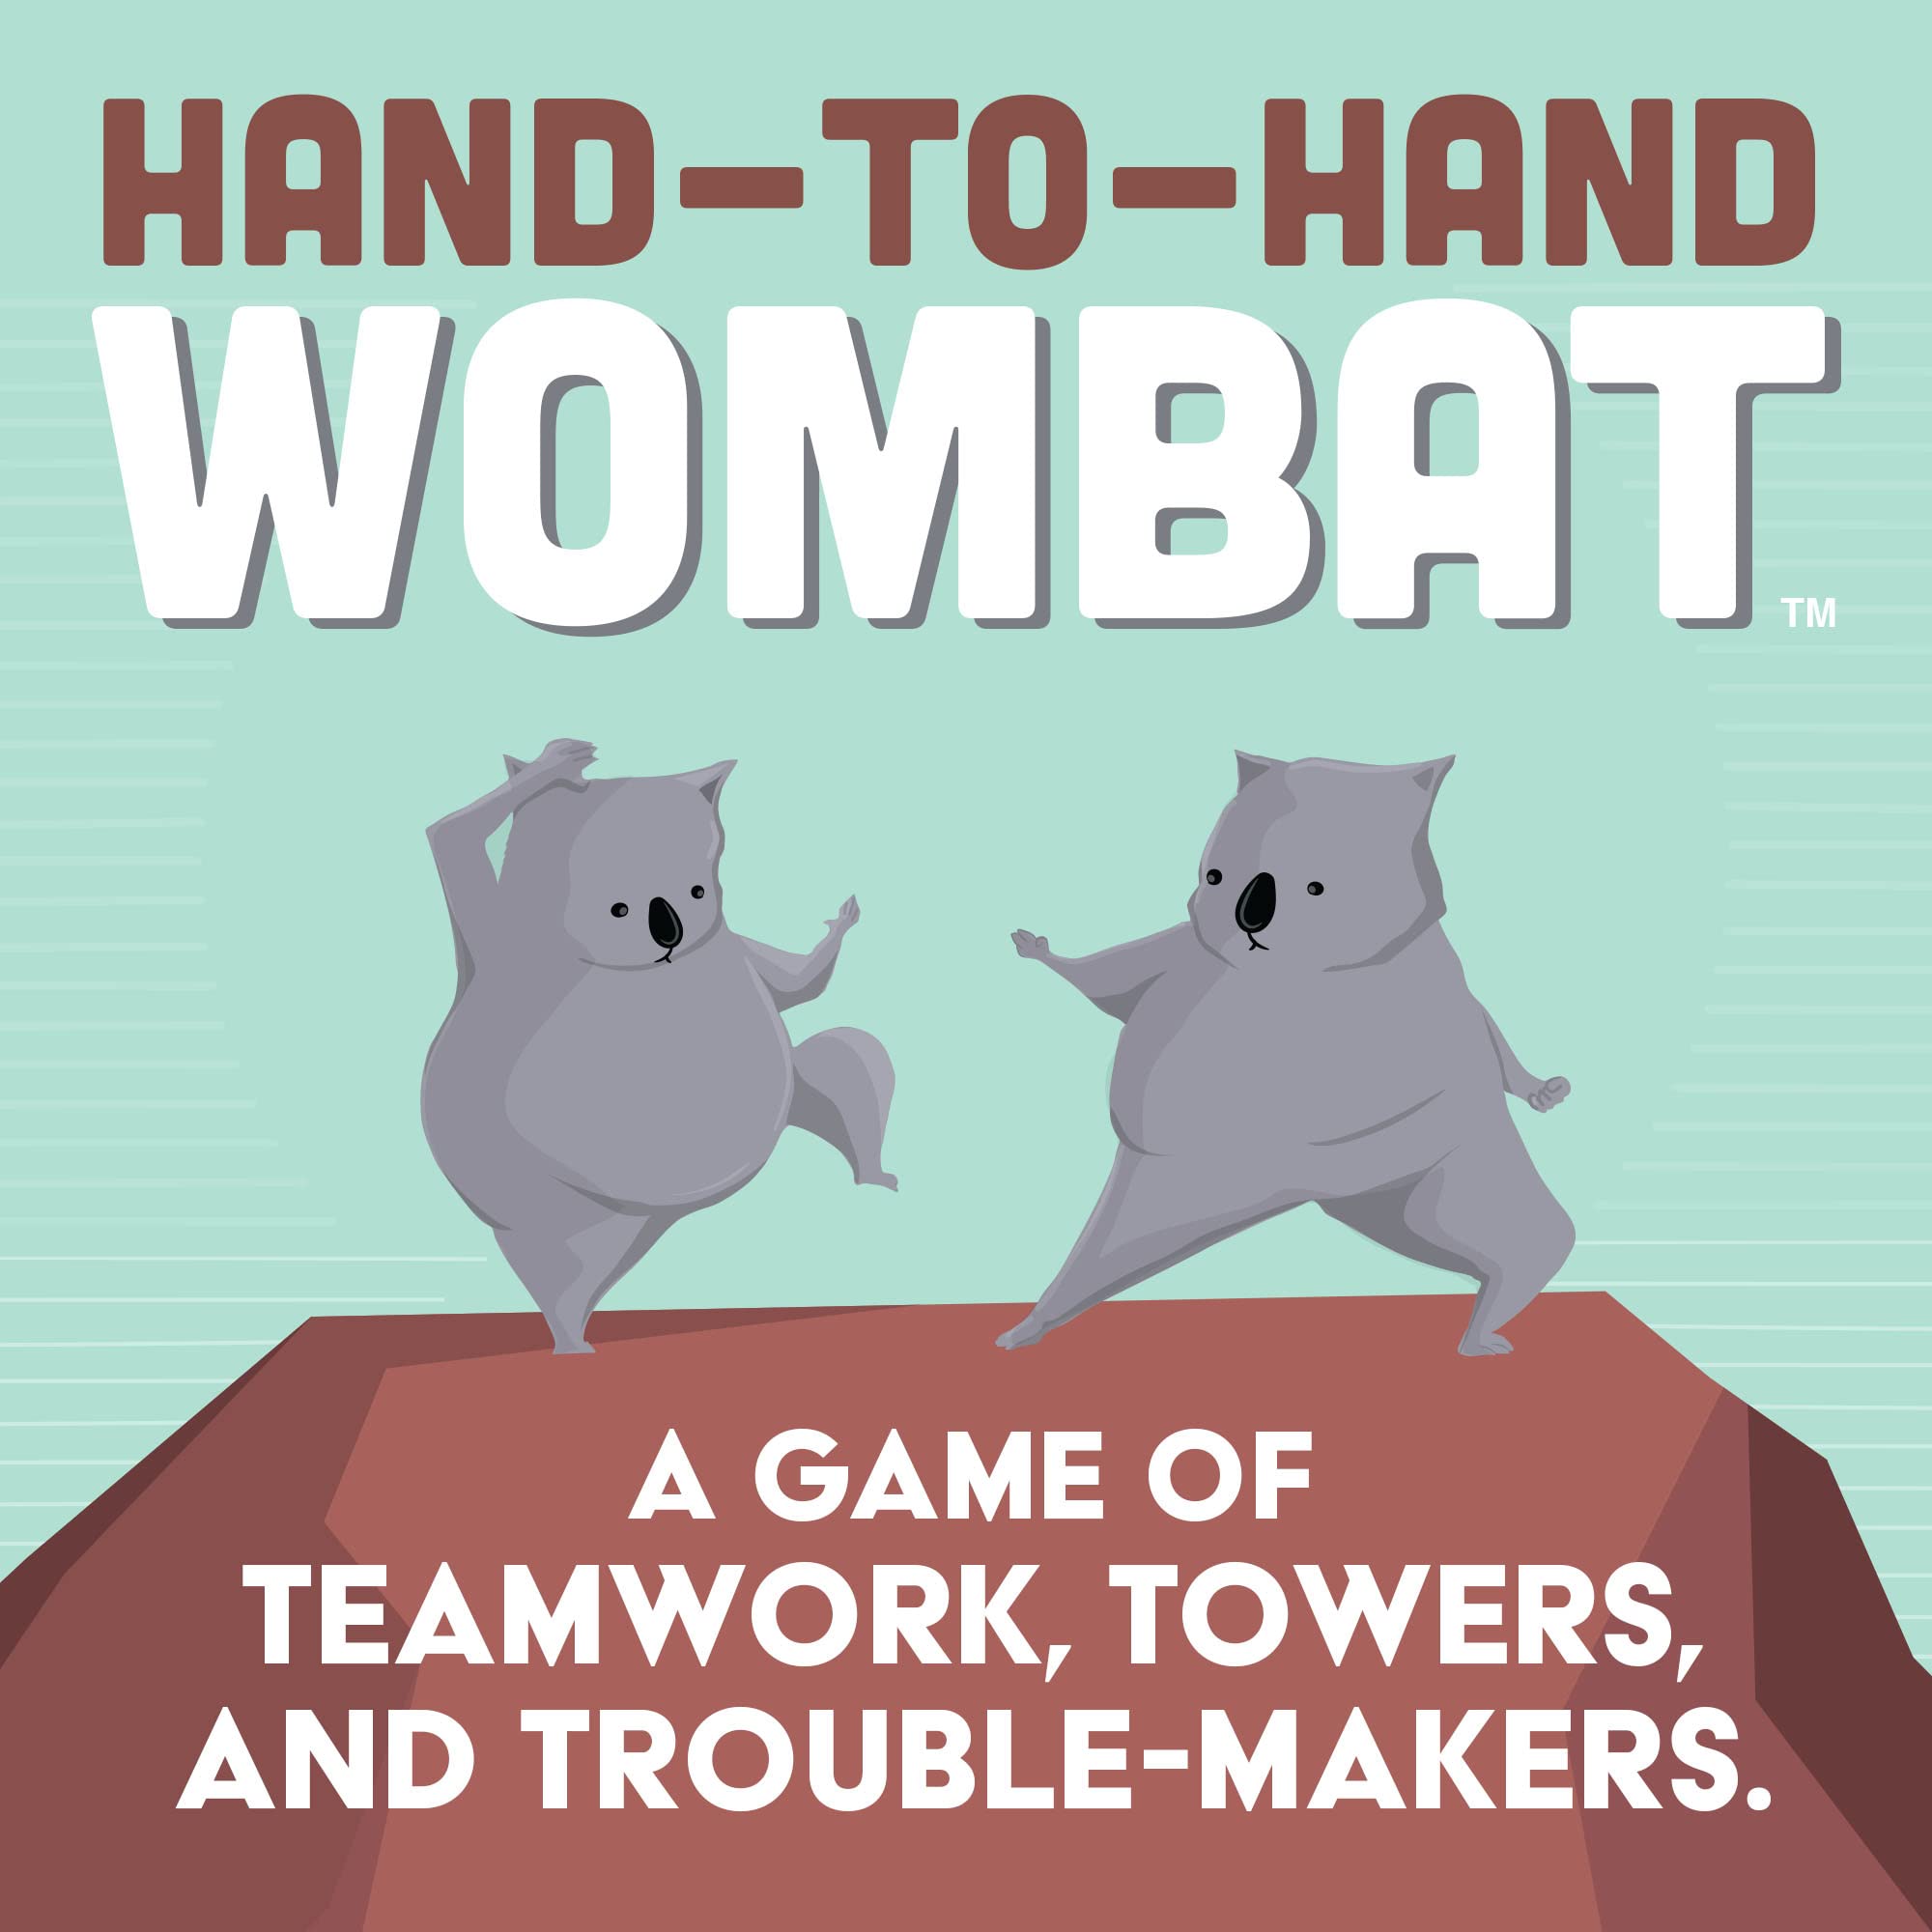 Exploding Kittens Hand to Hand Wombat Card Game Fun Family Card Games for Adults Teens & Kids - Fun Party Games, 3-6 Players